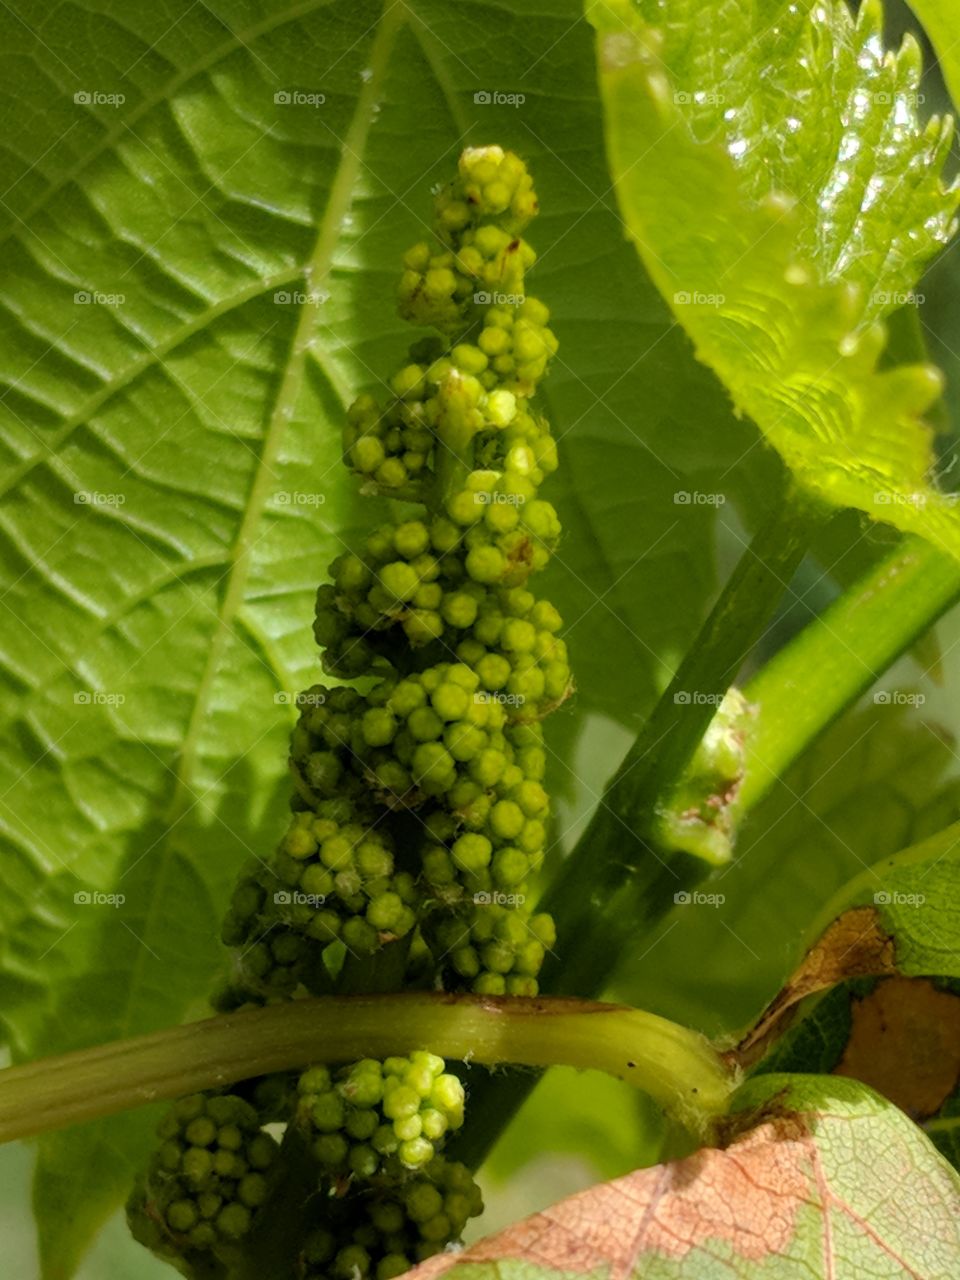 baby grapes coming in